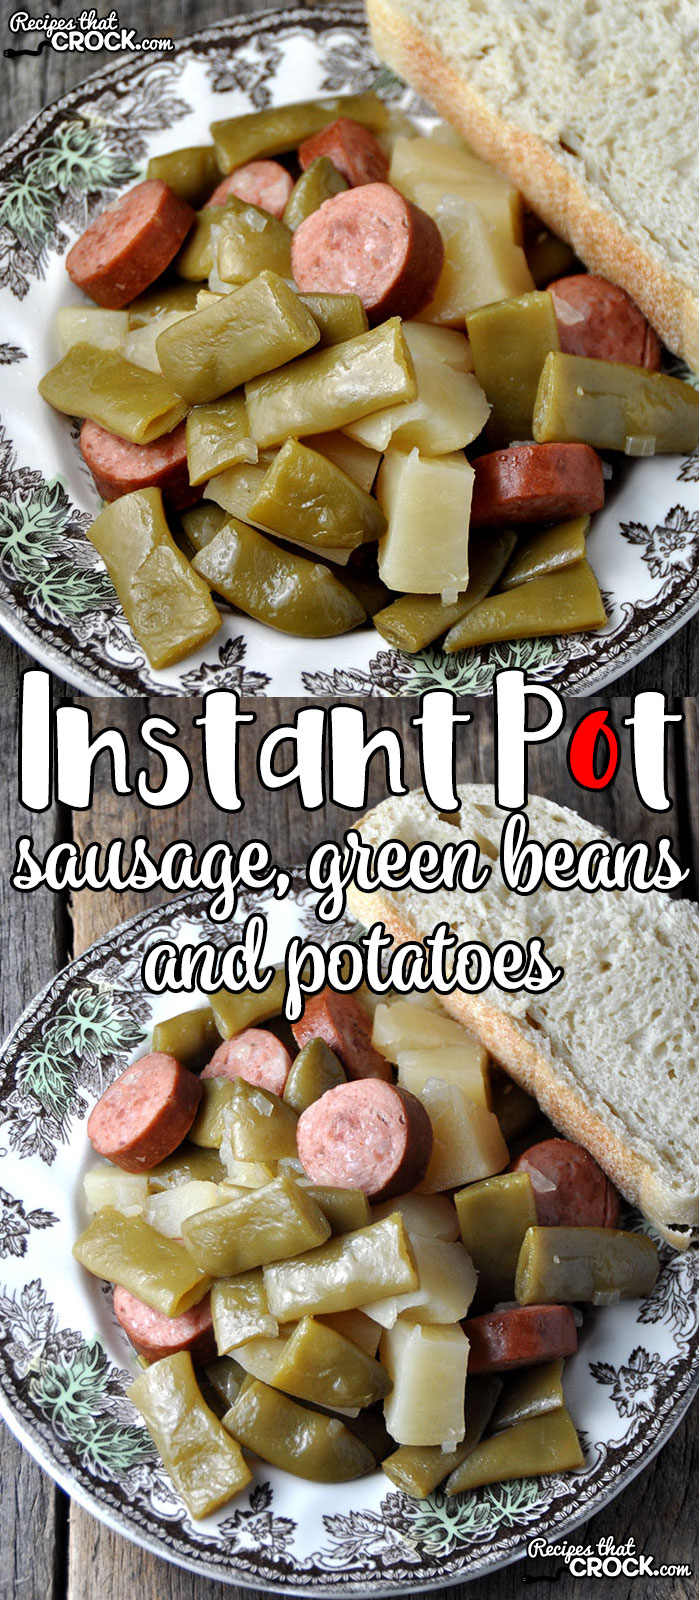 We've taken on of our family favorite crock pot recipes and made it into an instant pot recipe. And we love this Instant Pot Sausage, Green Beans and Potatoes recipe!